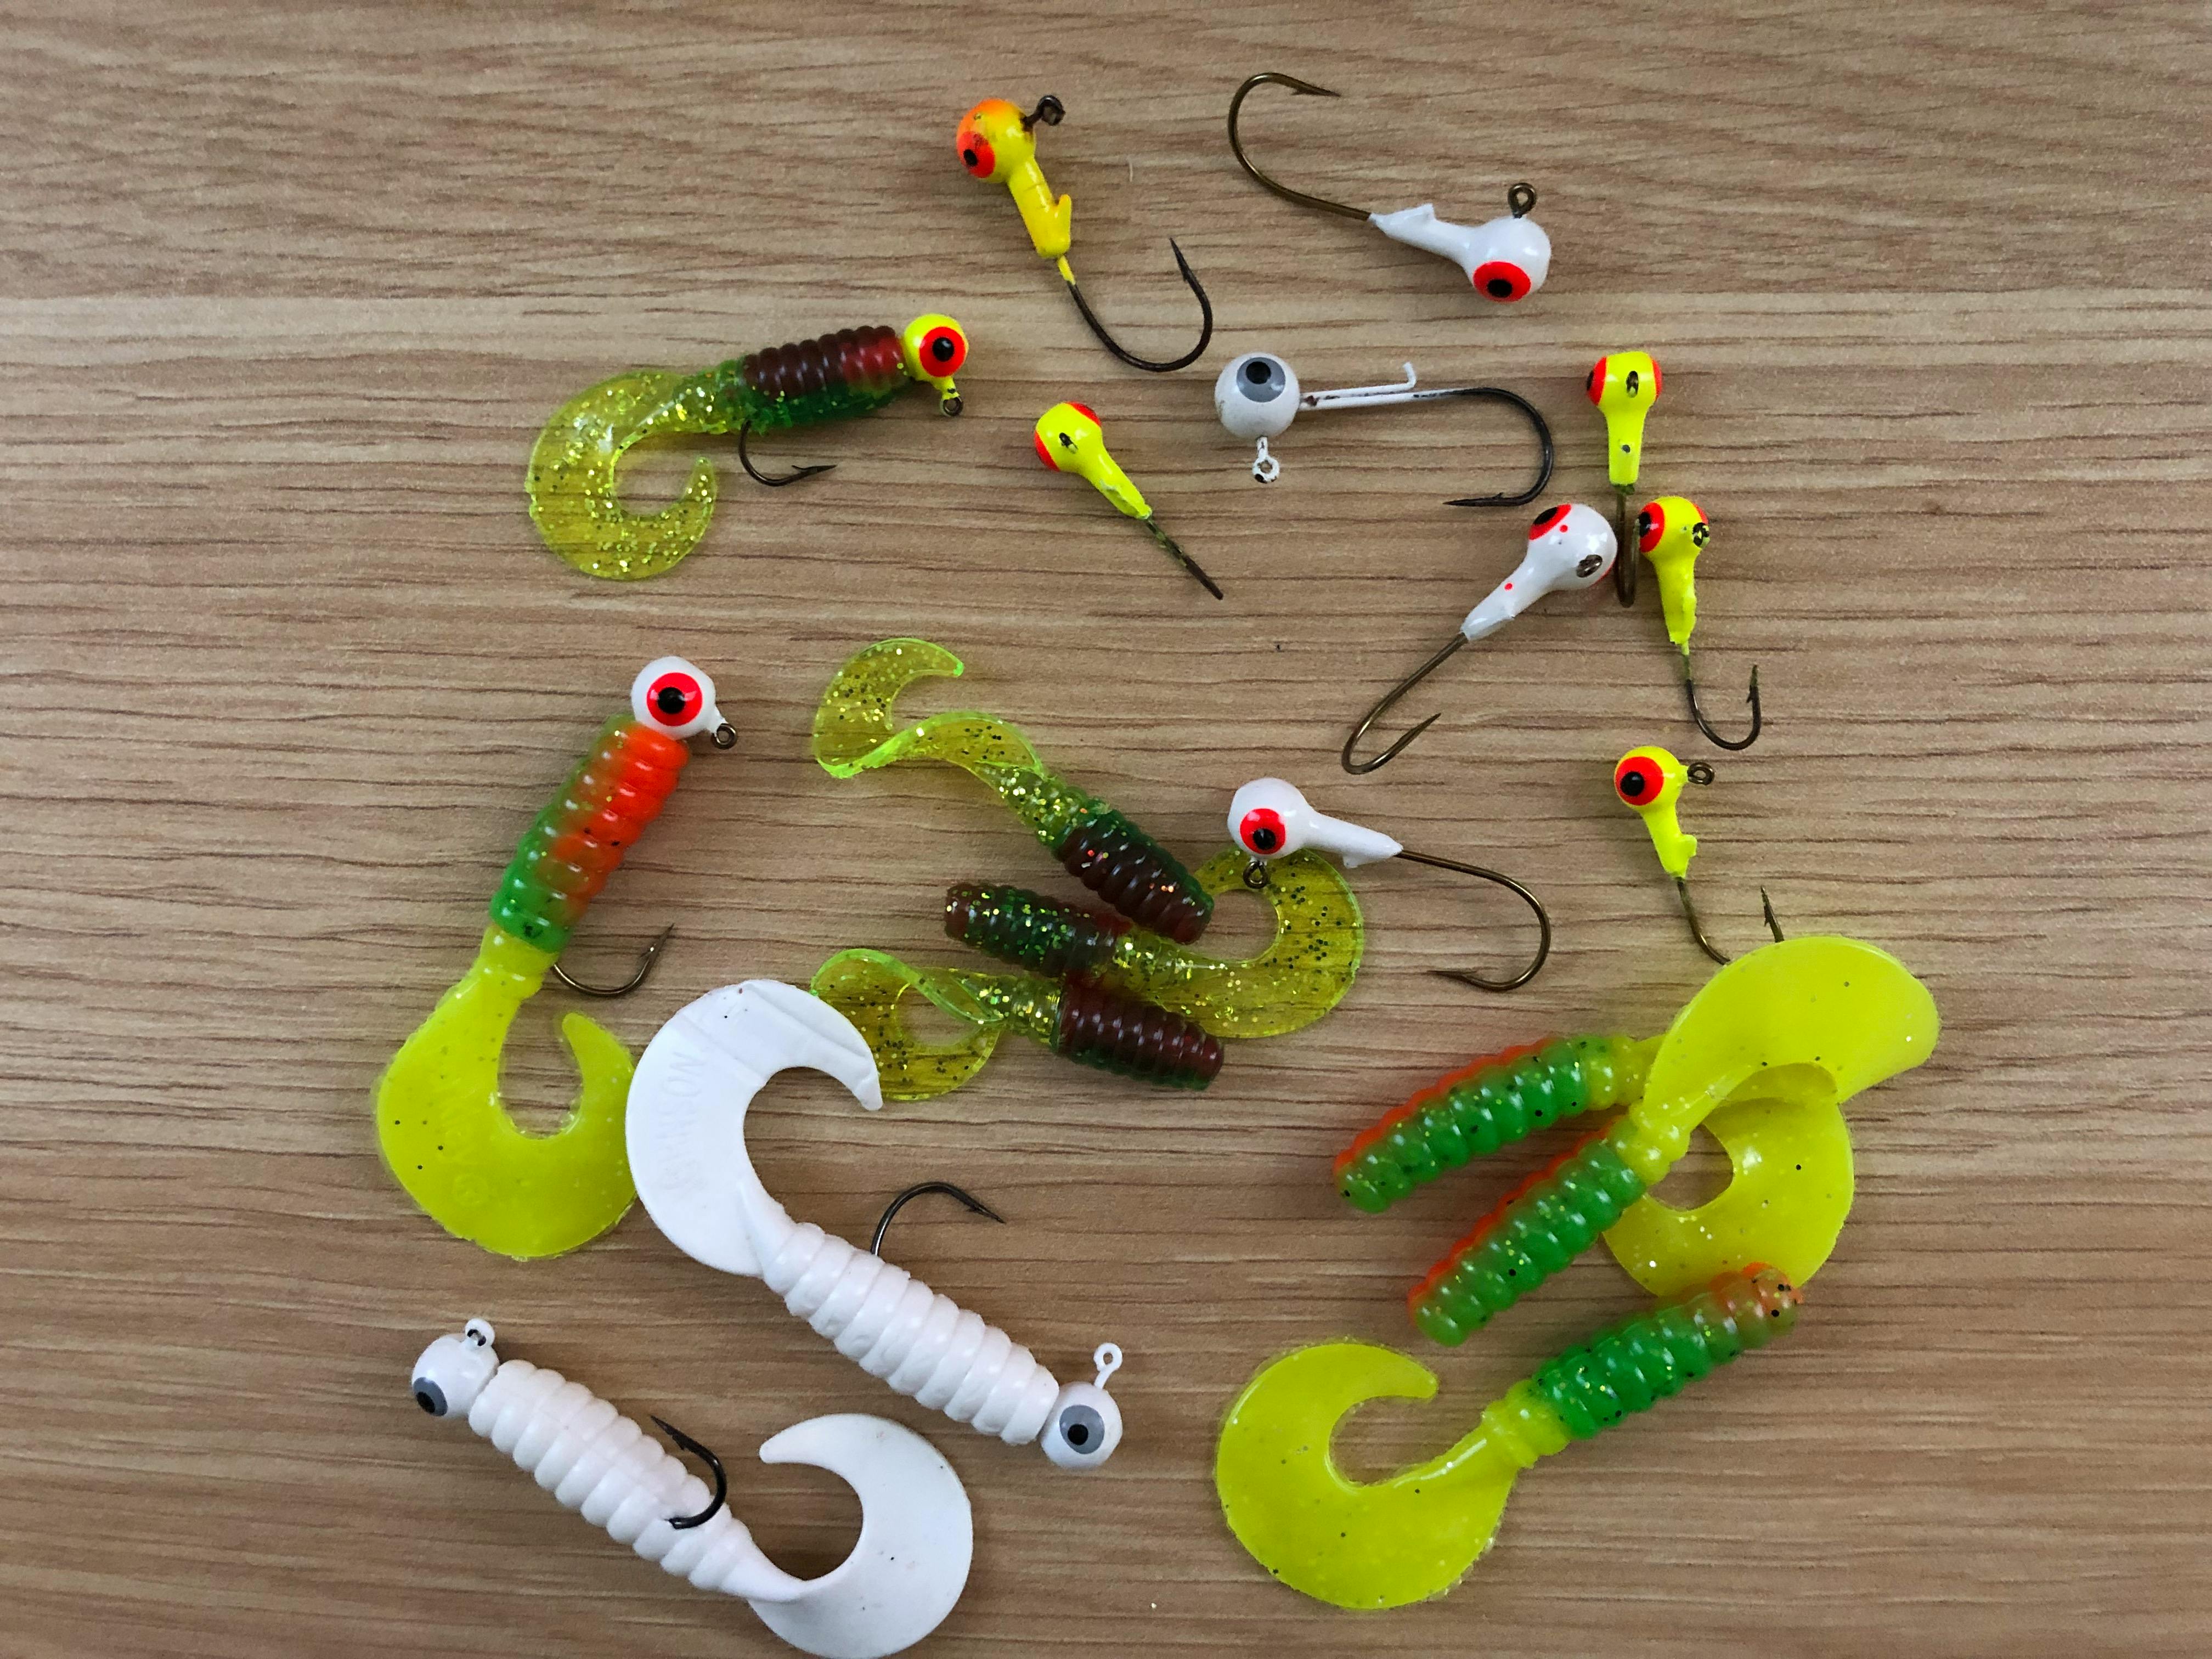 Fishing on a table. Some are white and some are green and yellow.